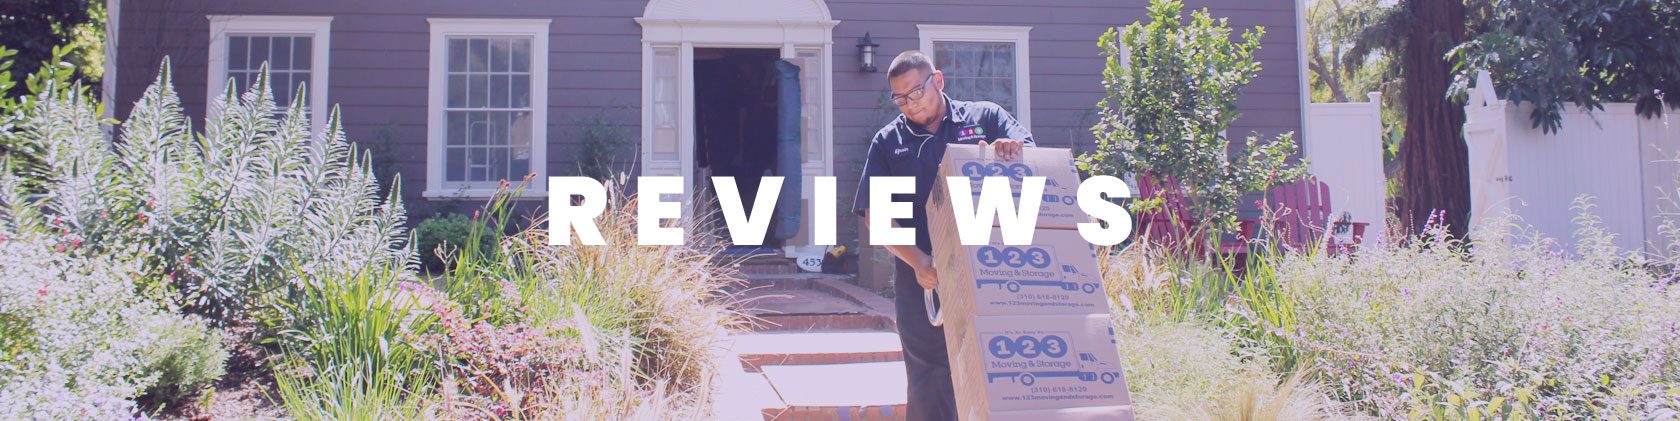 Reviews and Testimonials of LA movers